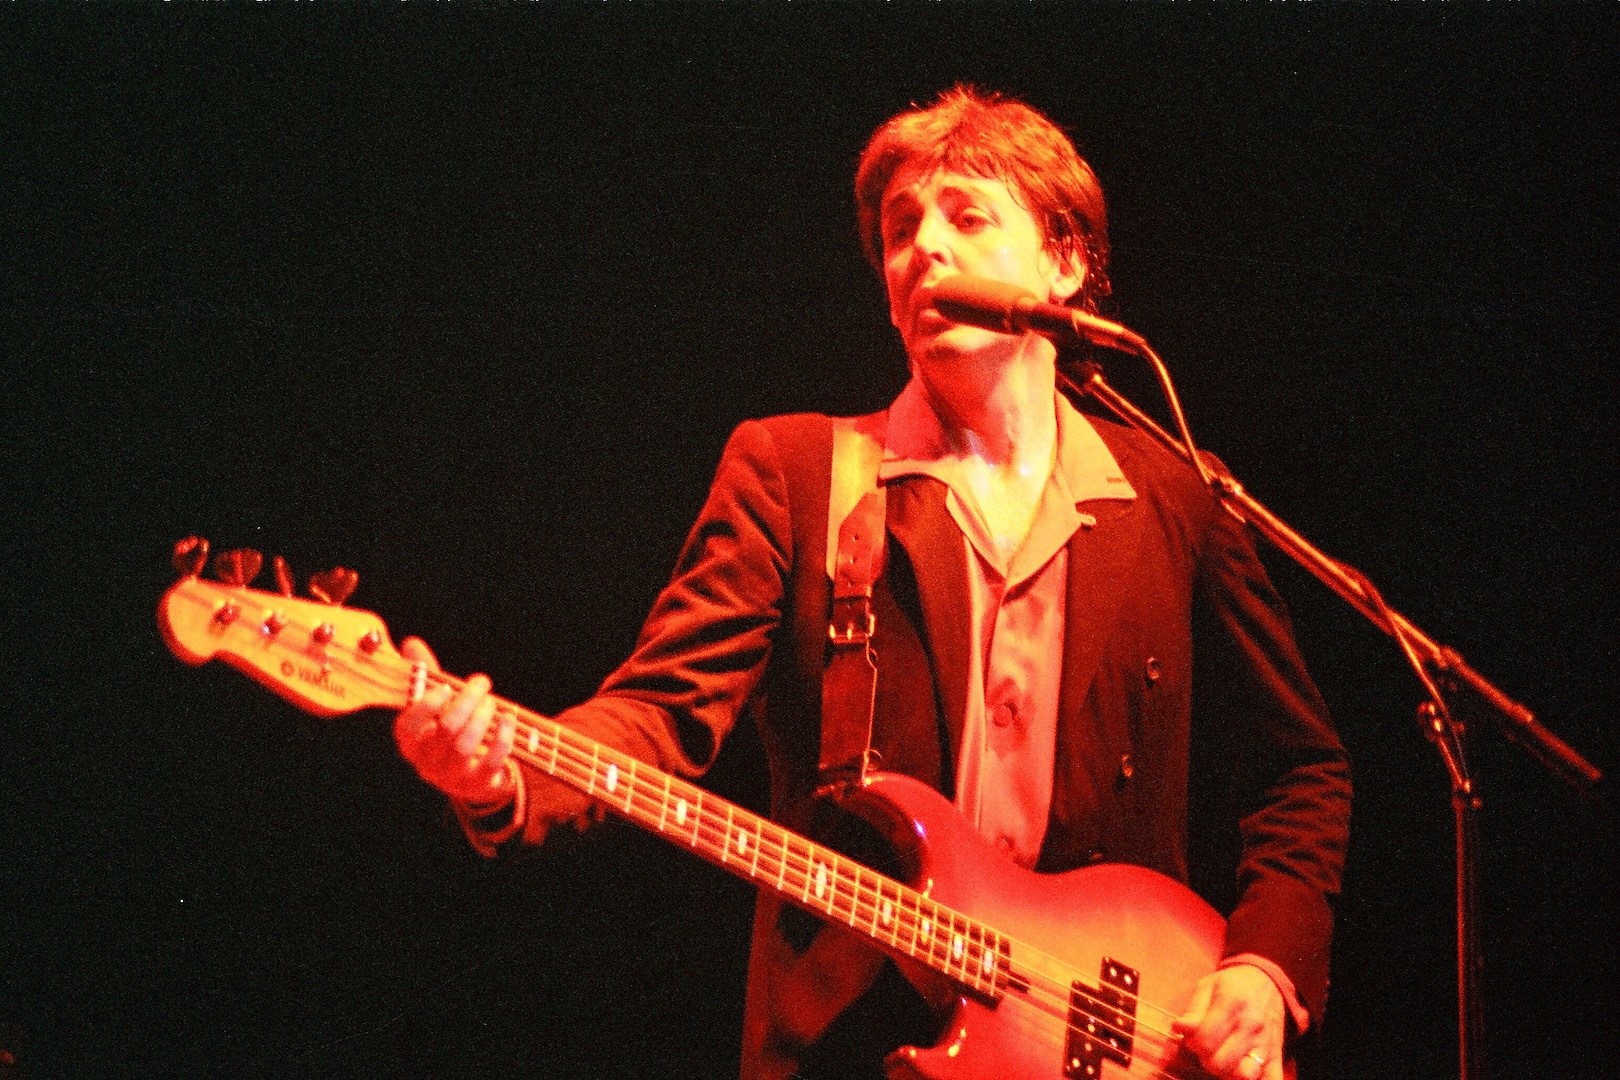 Paul McCartney’s Yamaha Now Most Expensive Bass Ever Auctioned